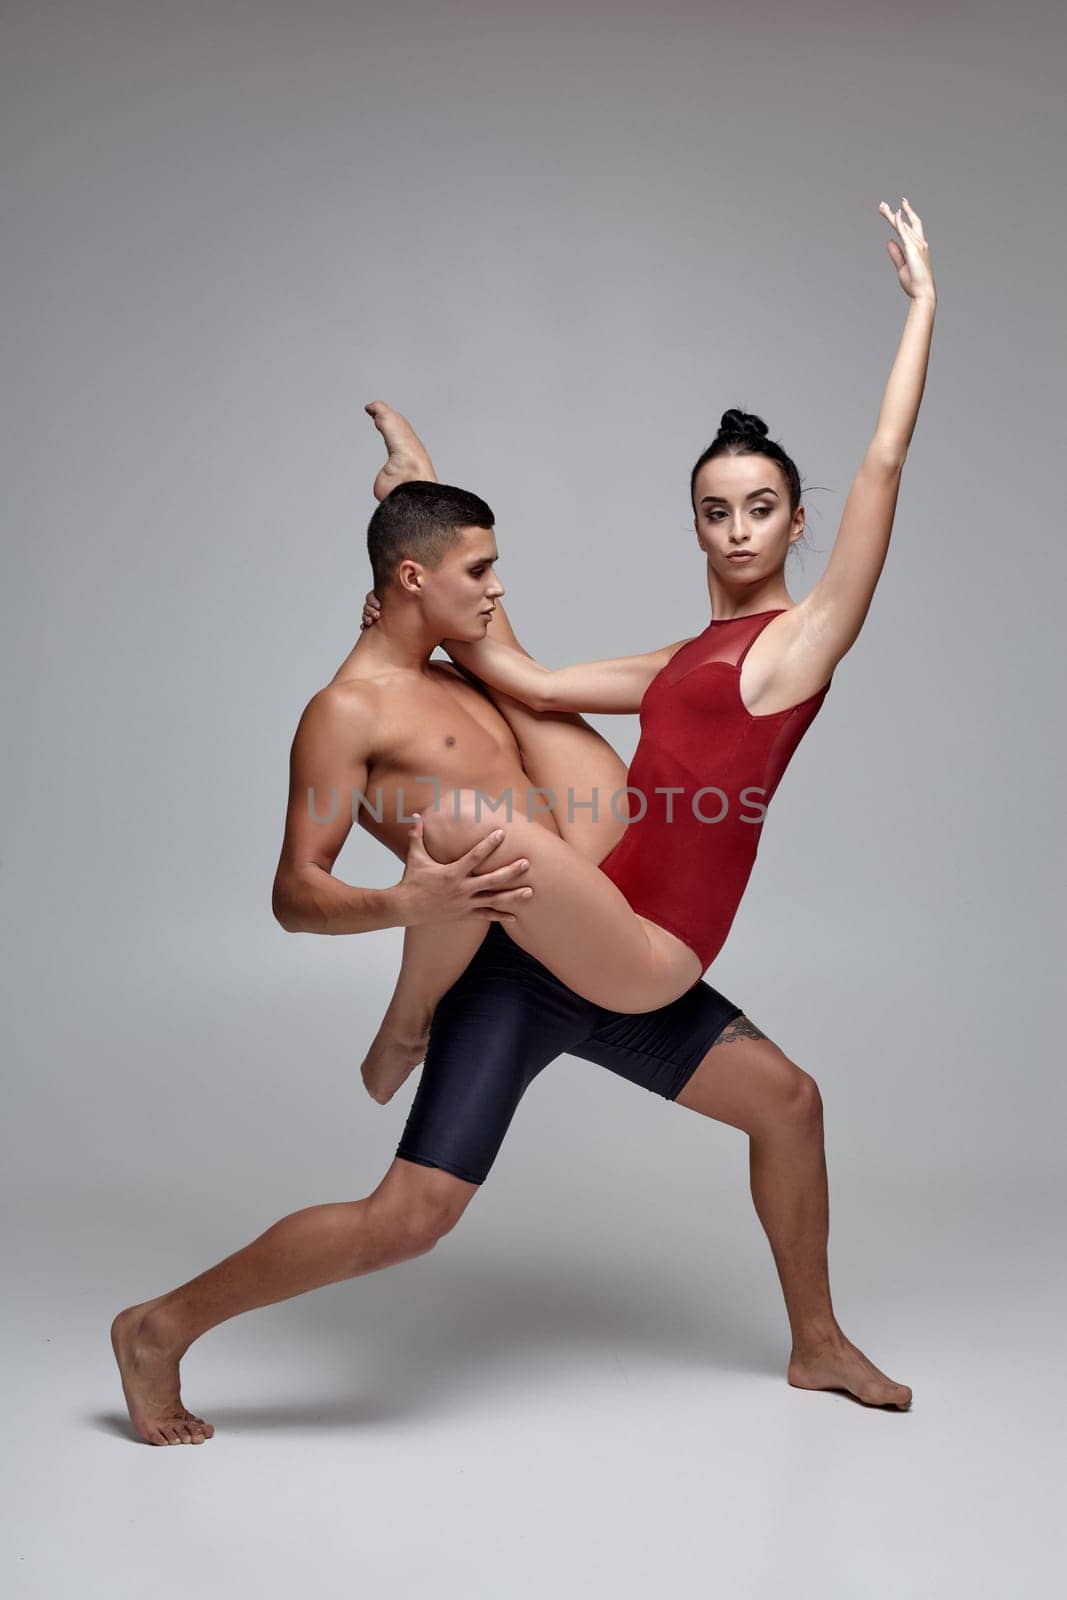 Couple of a young athletic ballet dancers are posing over a gray studio background. Handsome man in black shorts and charming woman in a red swimwear are dancing together. Ballet and contemporary choreography concept. Art photo.